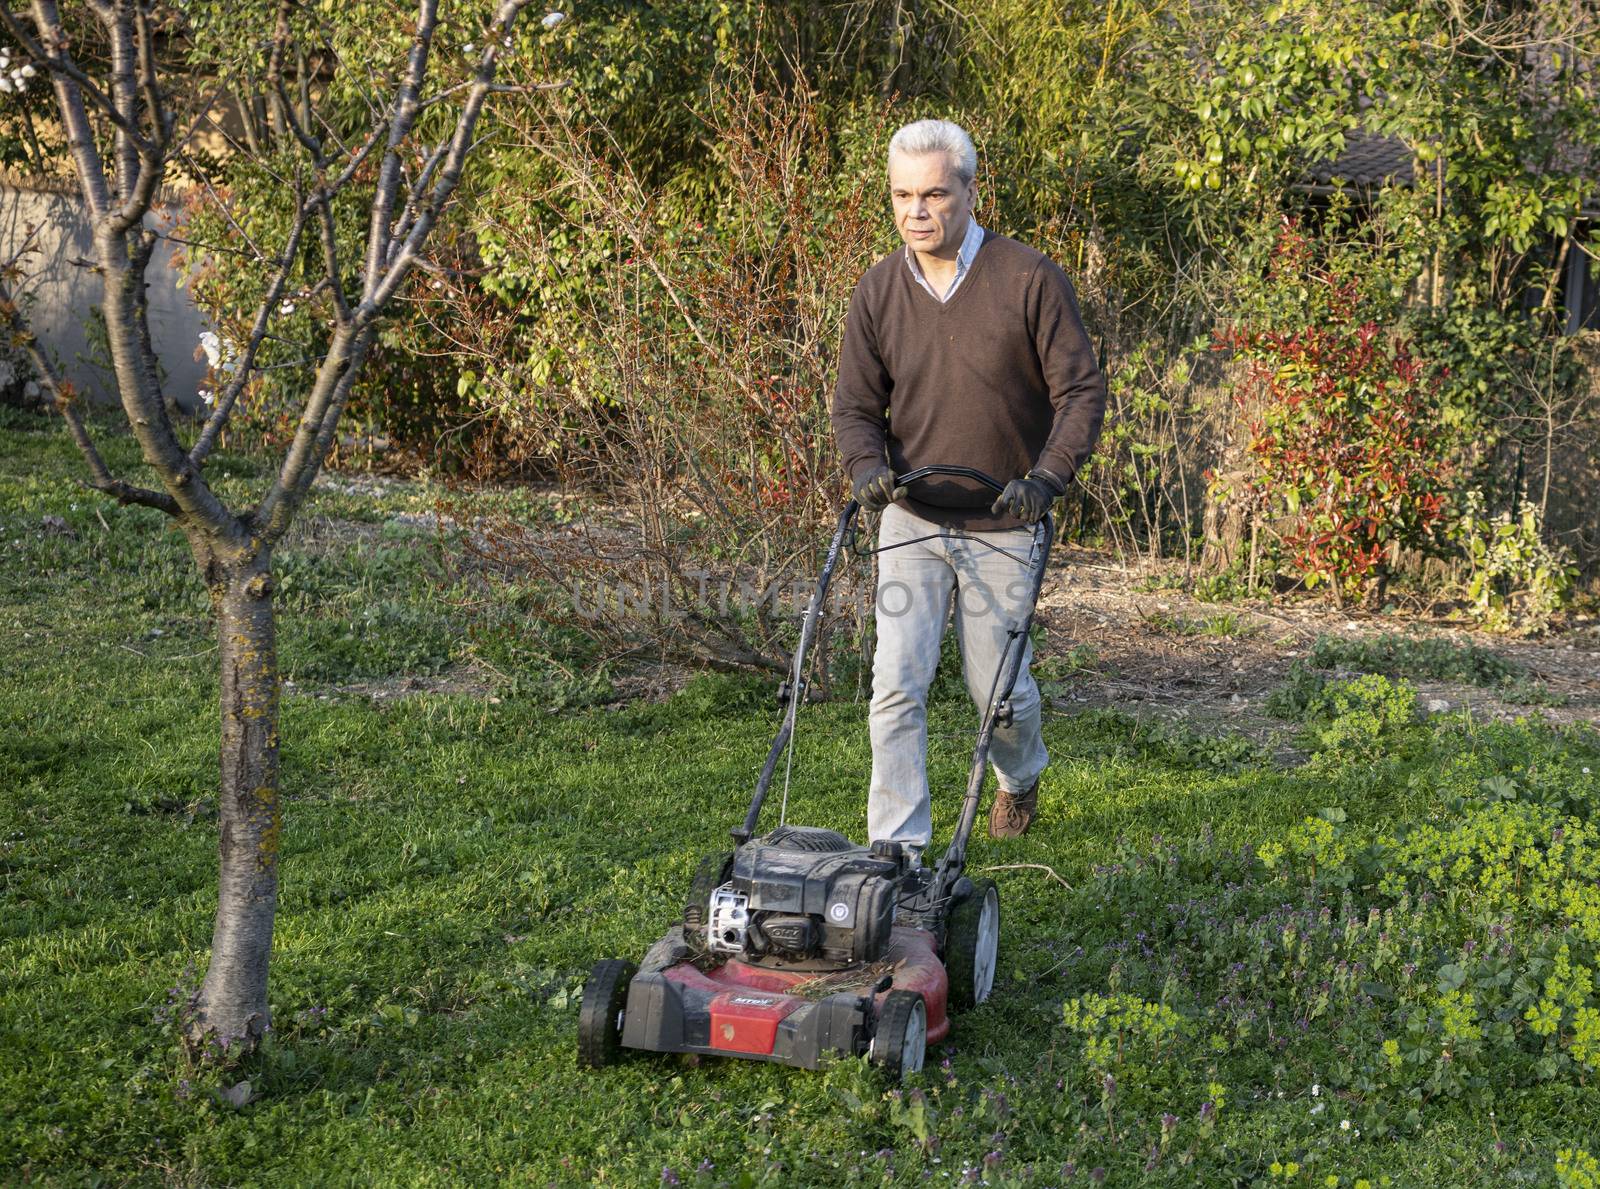 Man with lawnmower in his garden in spring